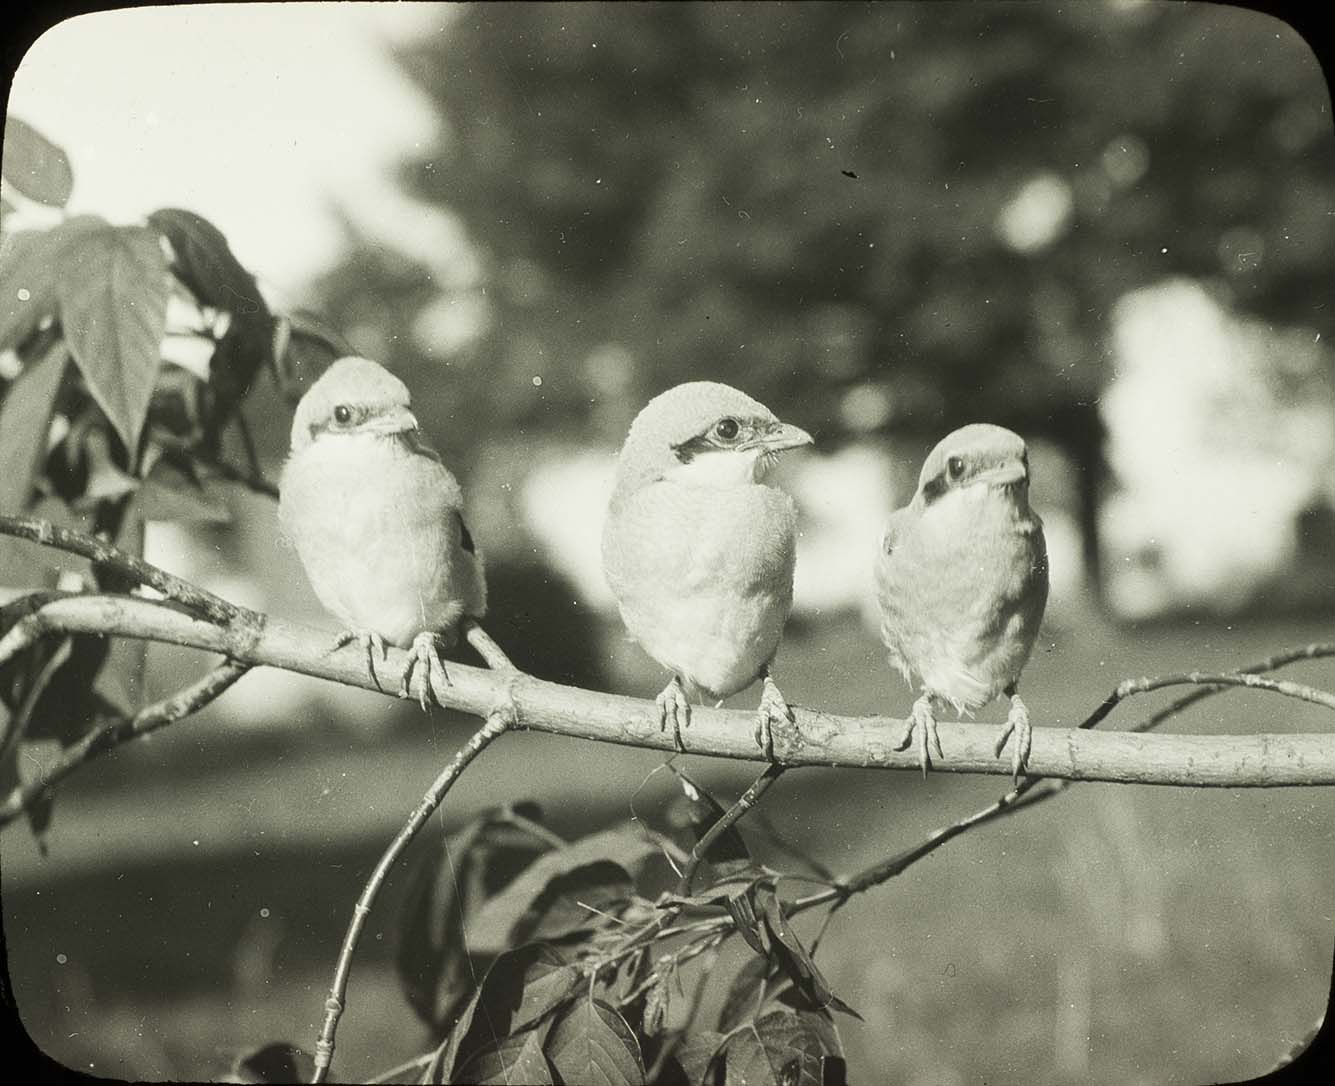 Lantern slide and photograph of three young Shrikes on a branch